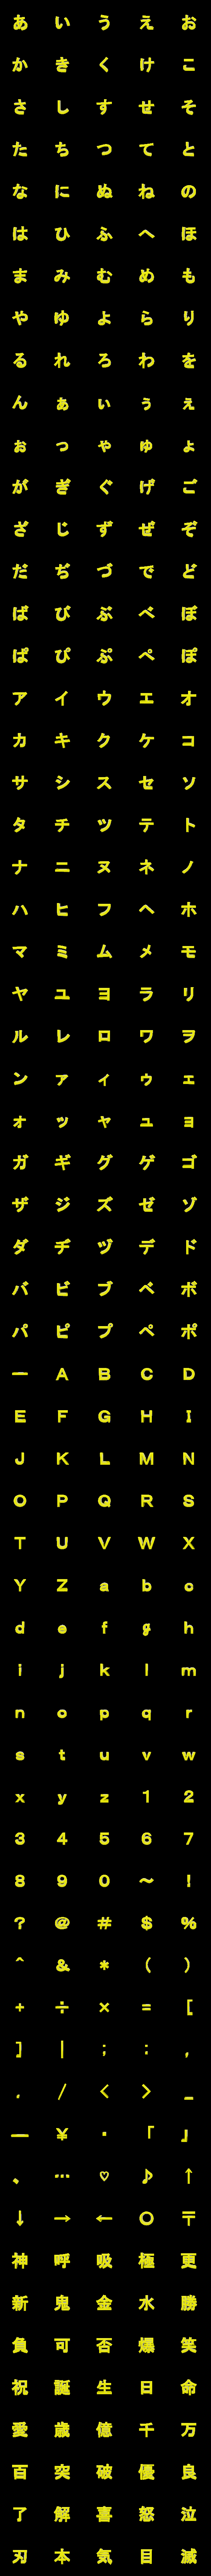 [LINE絵文字]横跳びゴシック体(黄)の画像一覧